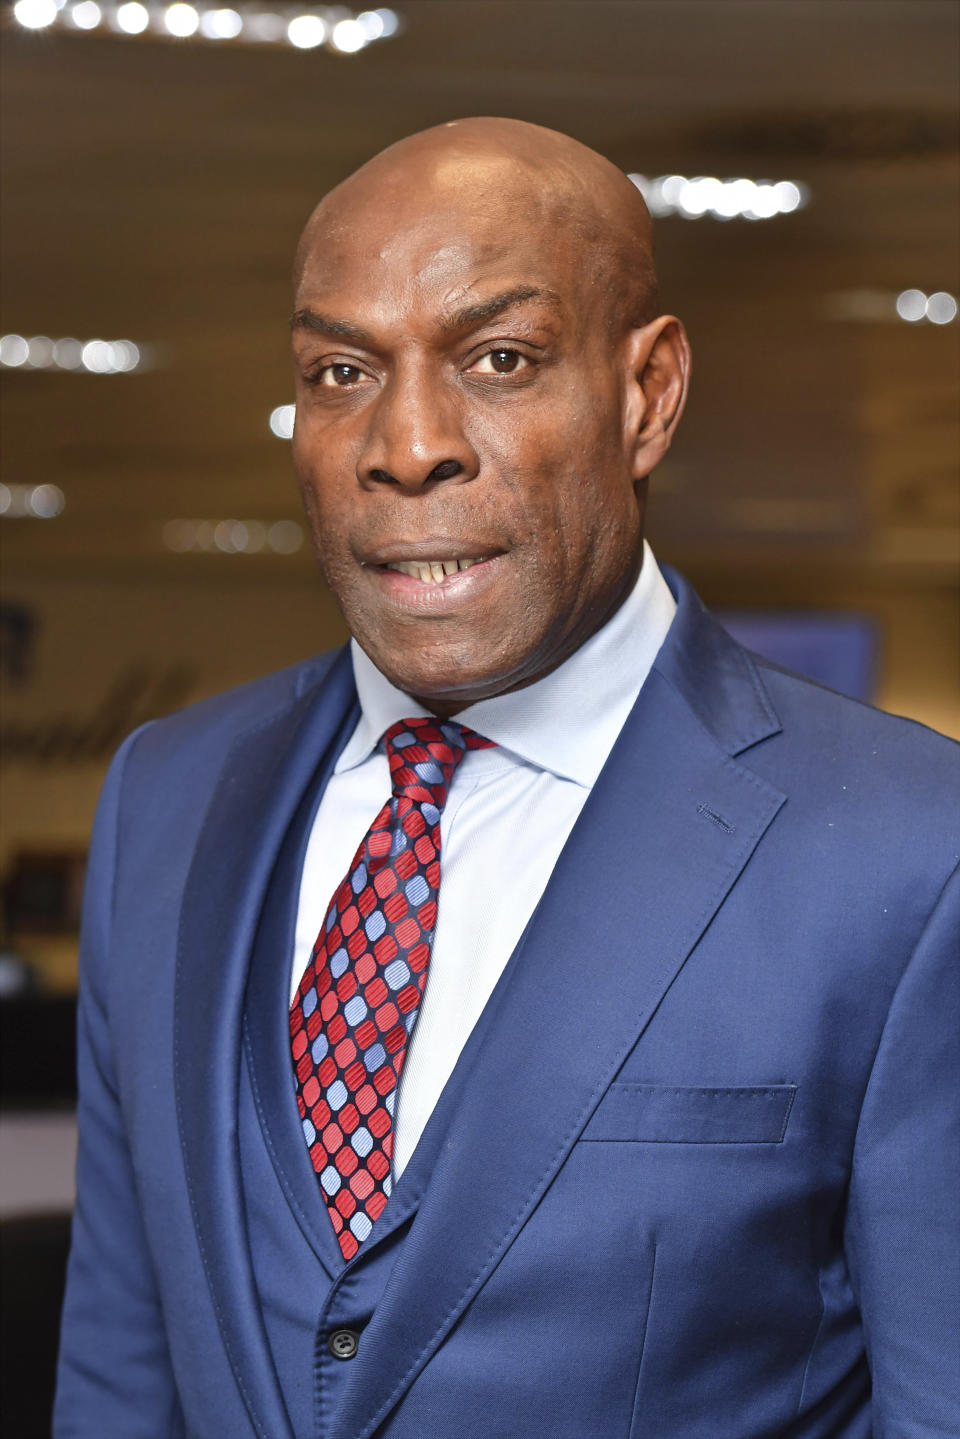 Photo by: KGC-143/STAR MAX/IPx 2018 9/11/18 Frank Bruno at the 14th Annual BGC Charity Day at BGC Partners in Canary Wharf, London, England, UK.